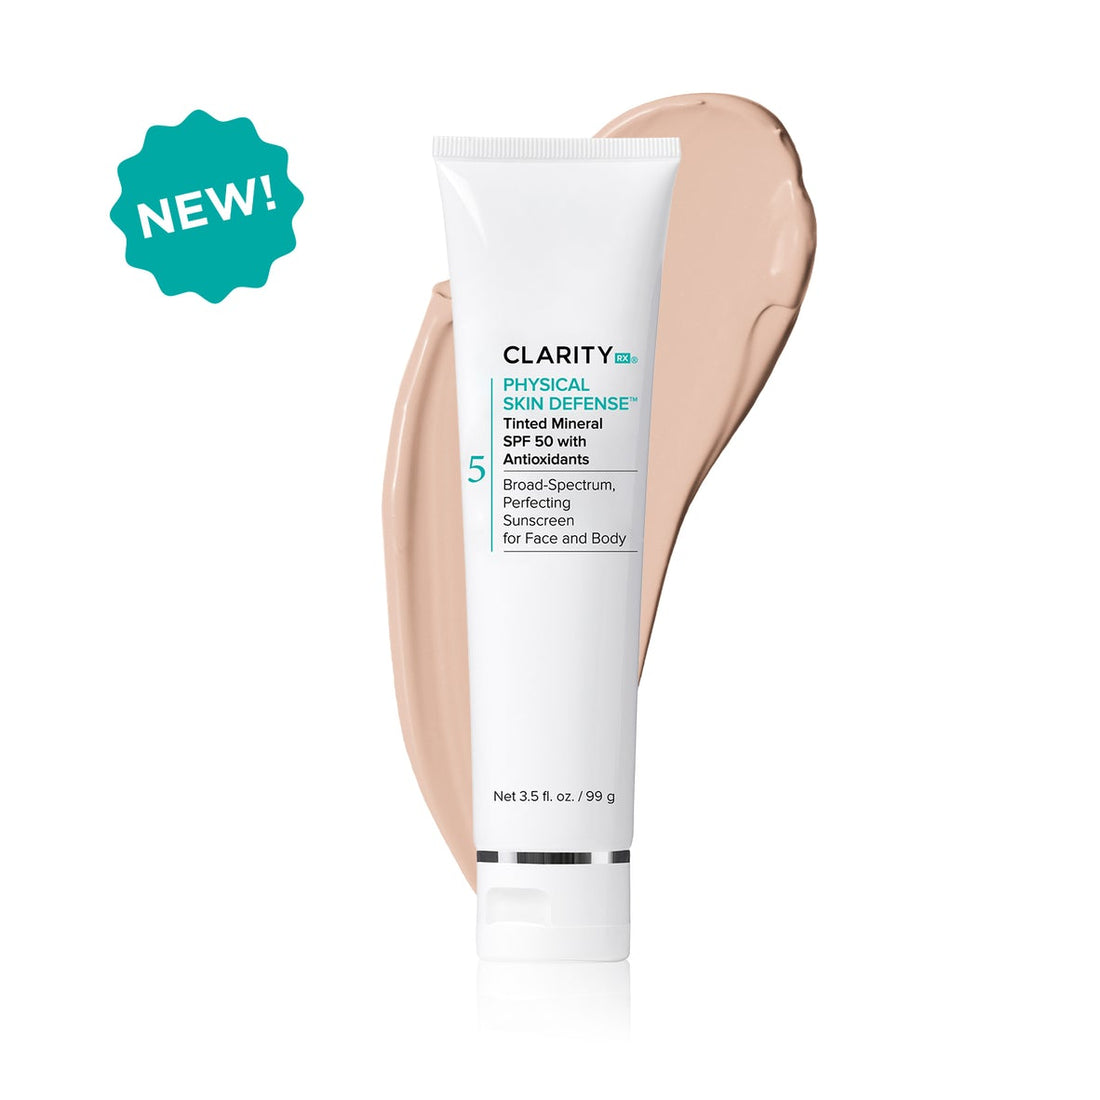 ClarityRx Physical Skin Defense Tinted Mineral SPF 50 ClarityRx 3.5 oz. Shop Skin Type Solutions